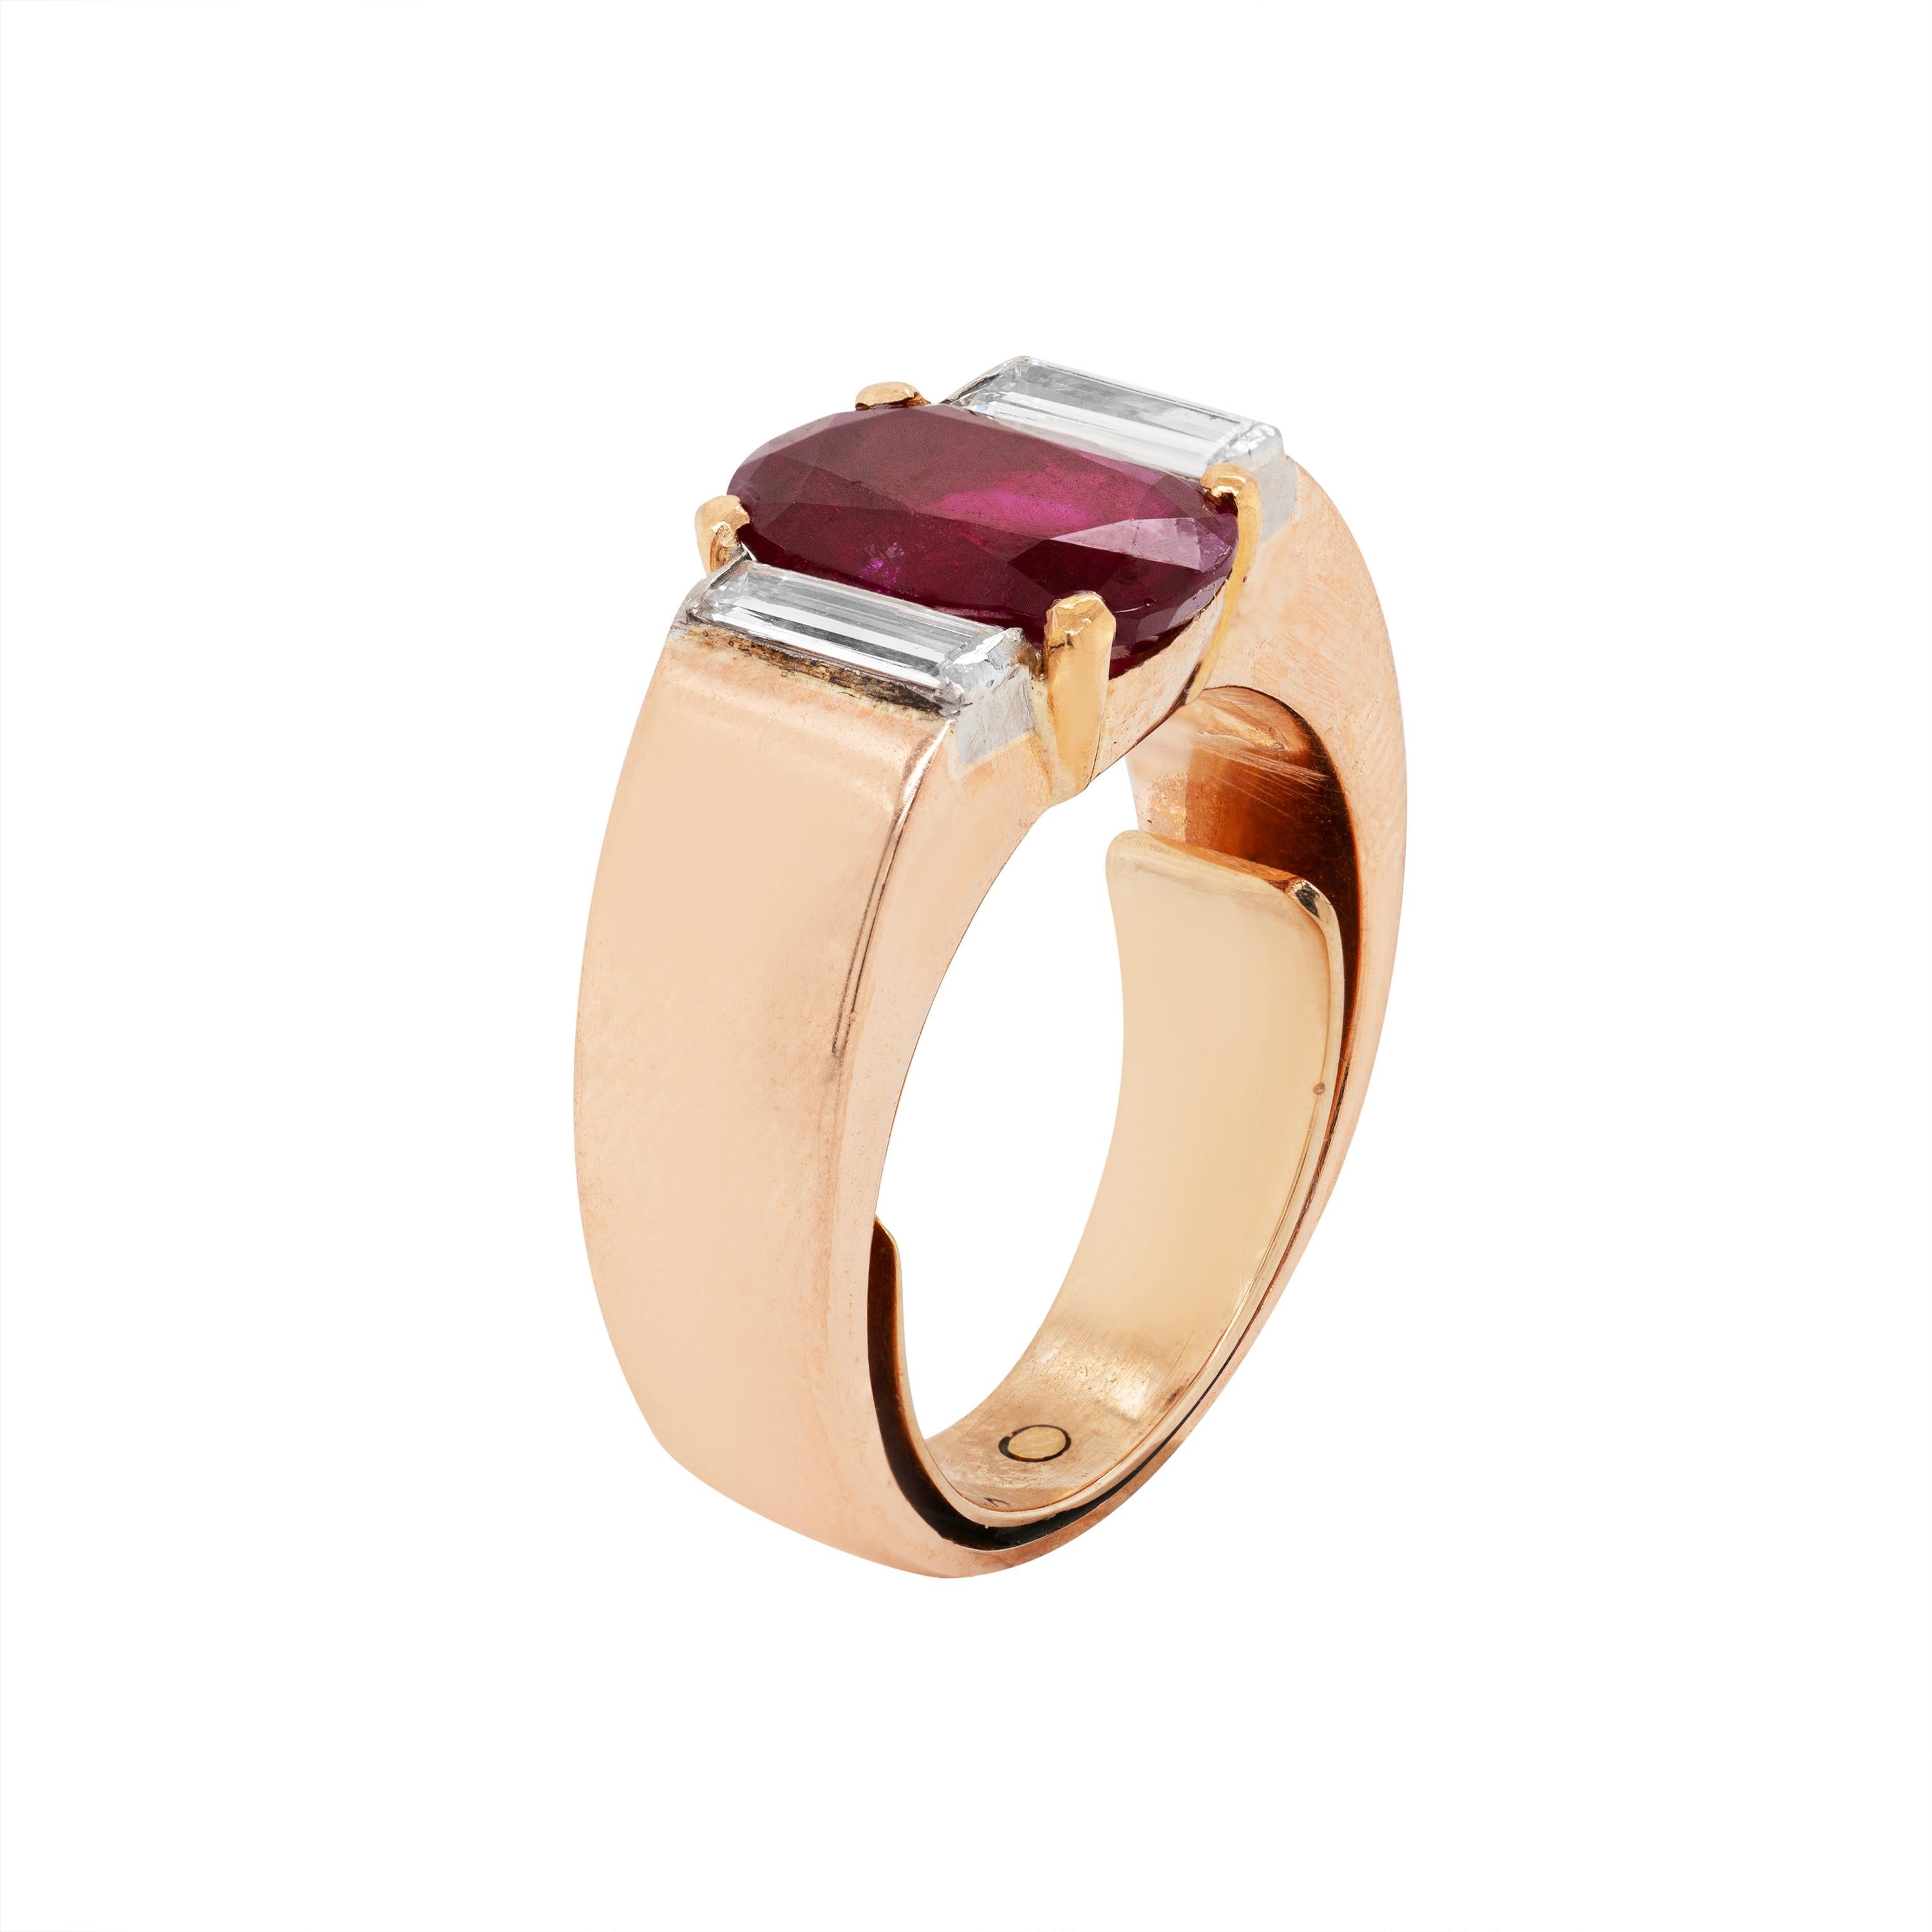 This vintage ring features a 2.60 carat vibrant cherry red oval ruby in a four claw open back setting. The beautiful stone is accompanied by two fine quality baguette cut diamonds weighing approximately 0.25 carat each in a solid 18 carat yellow